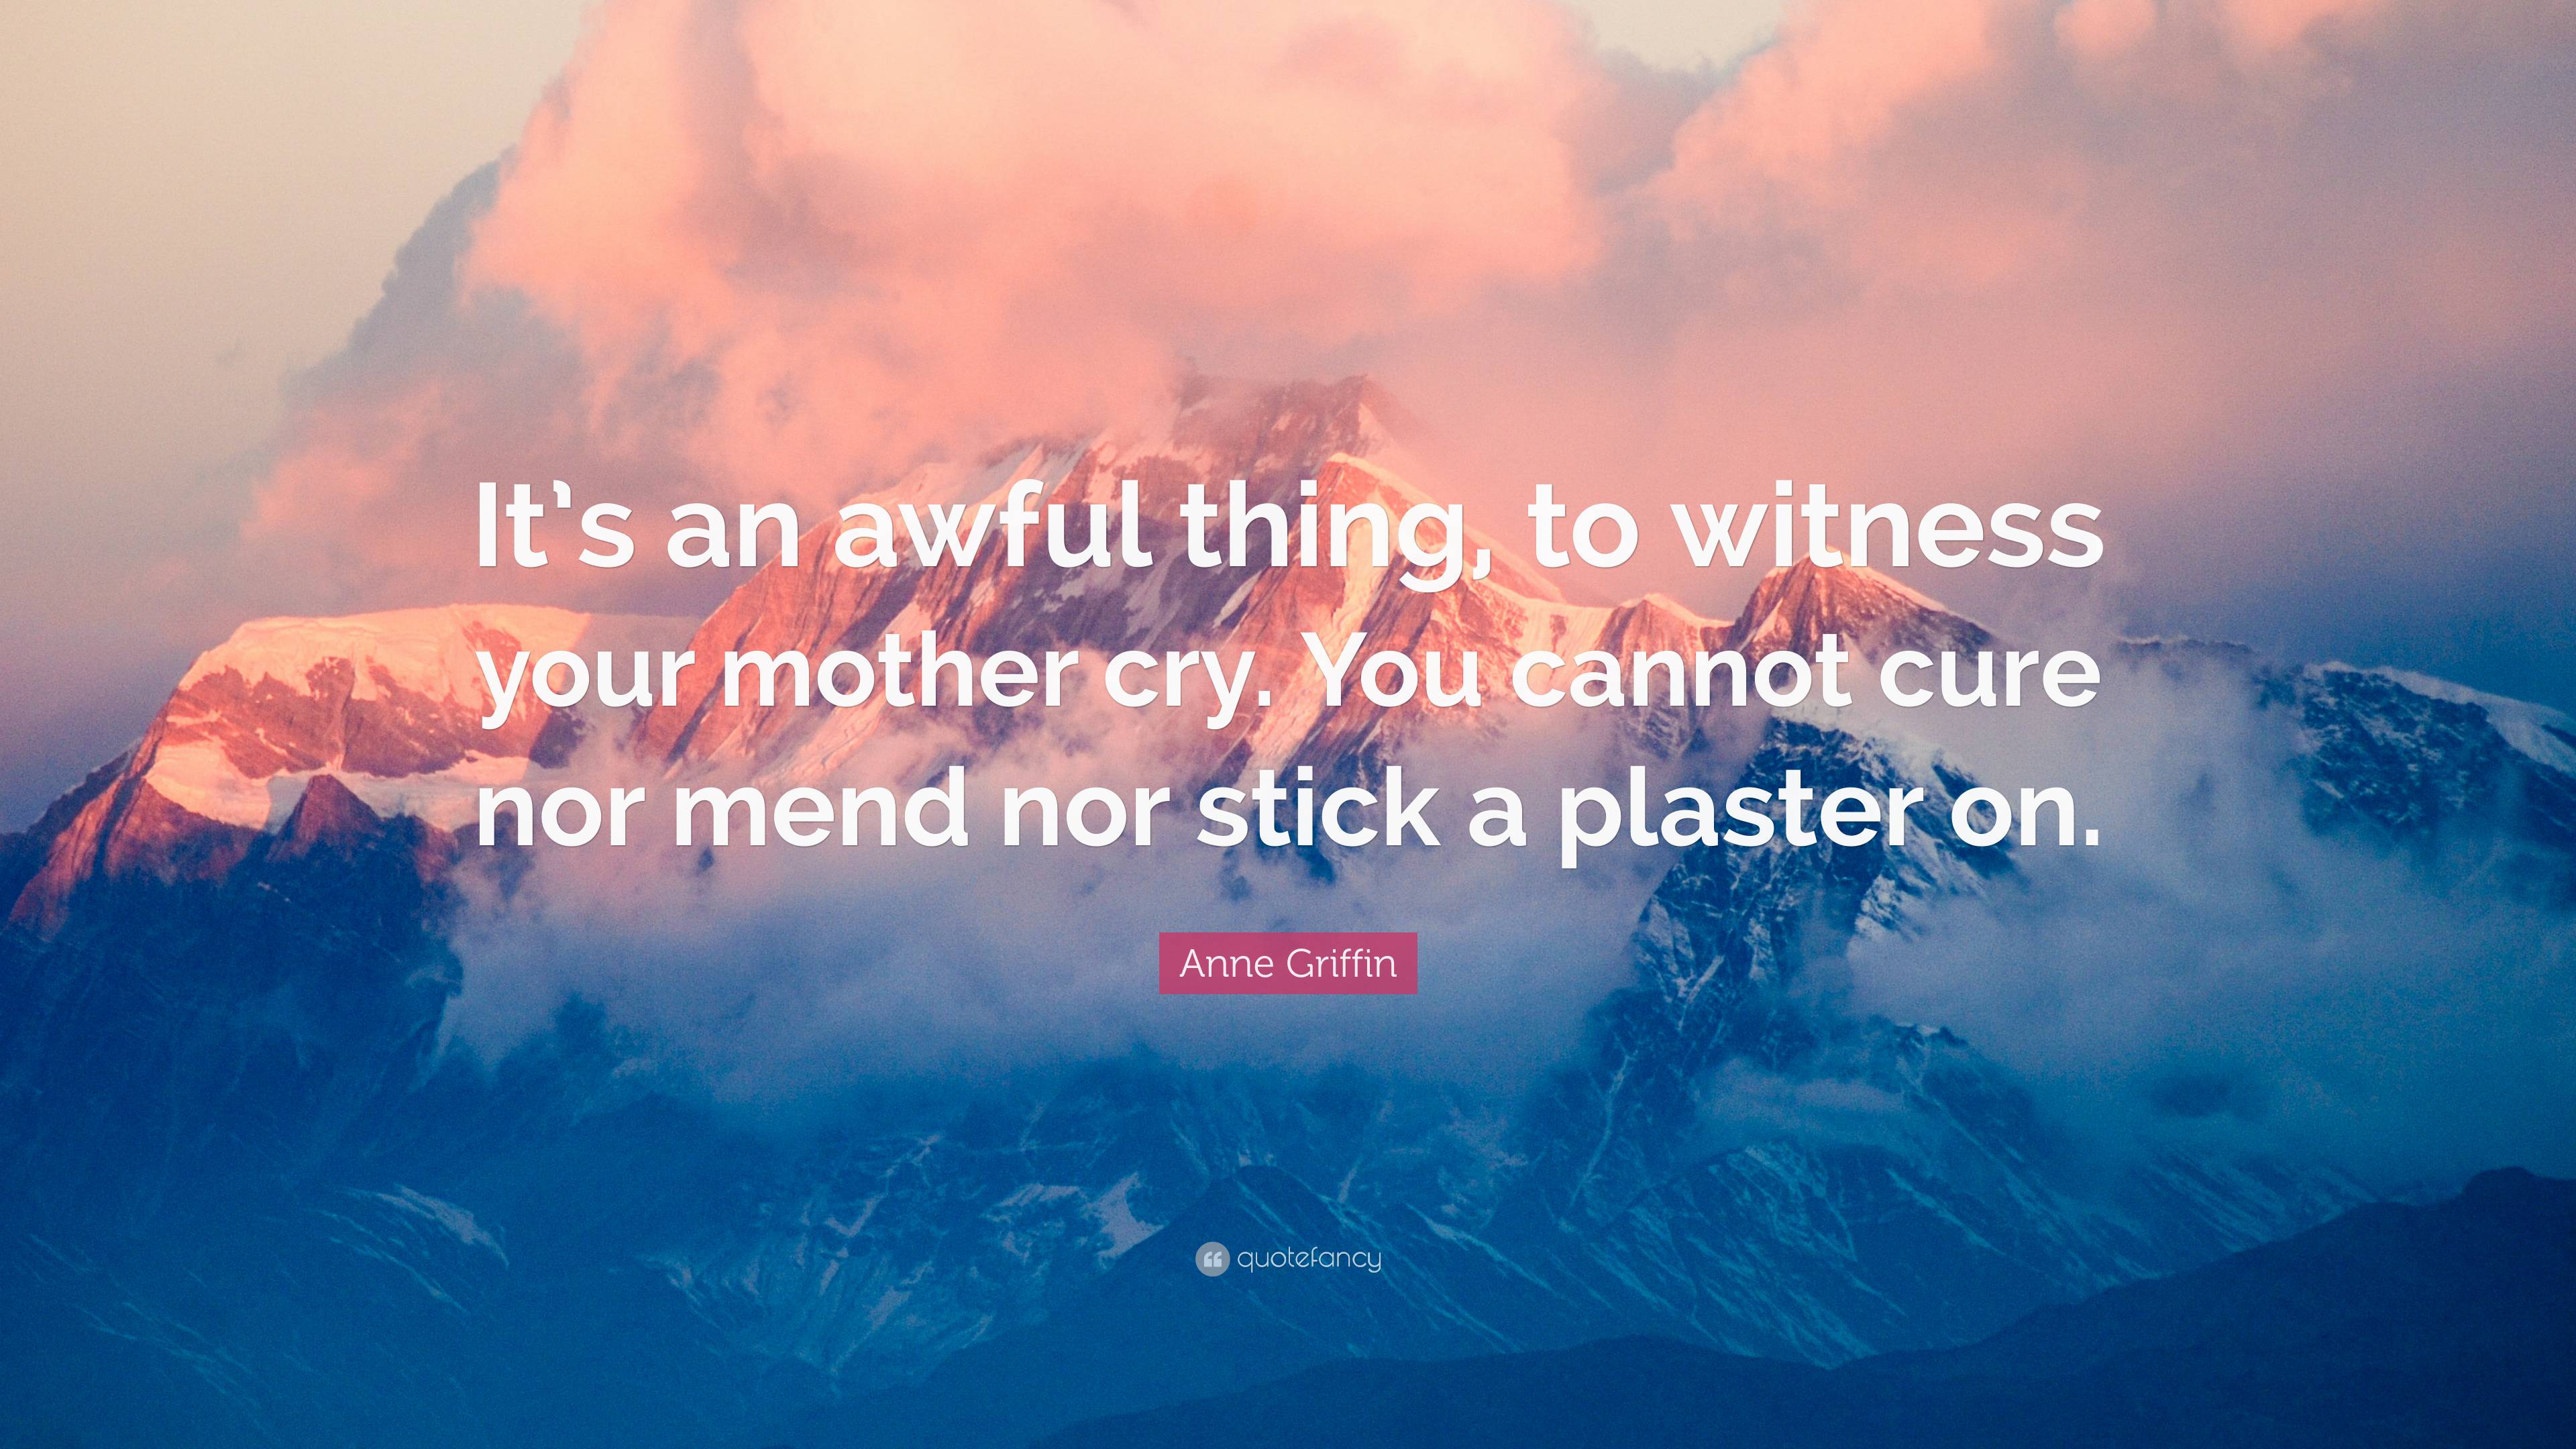 Anne Griffin Quote: “It’s an awful thing, to witness your mother cry ...